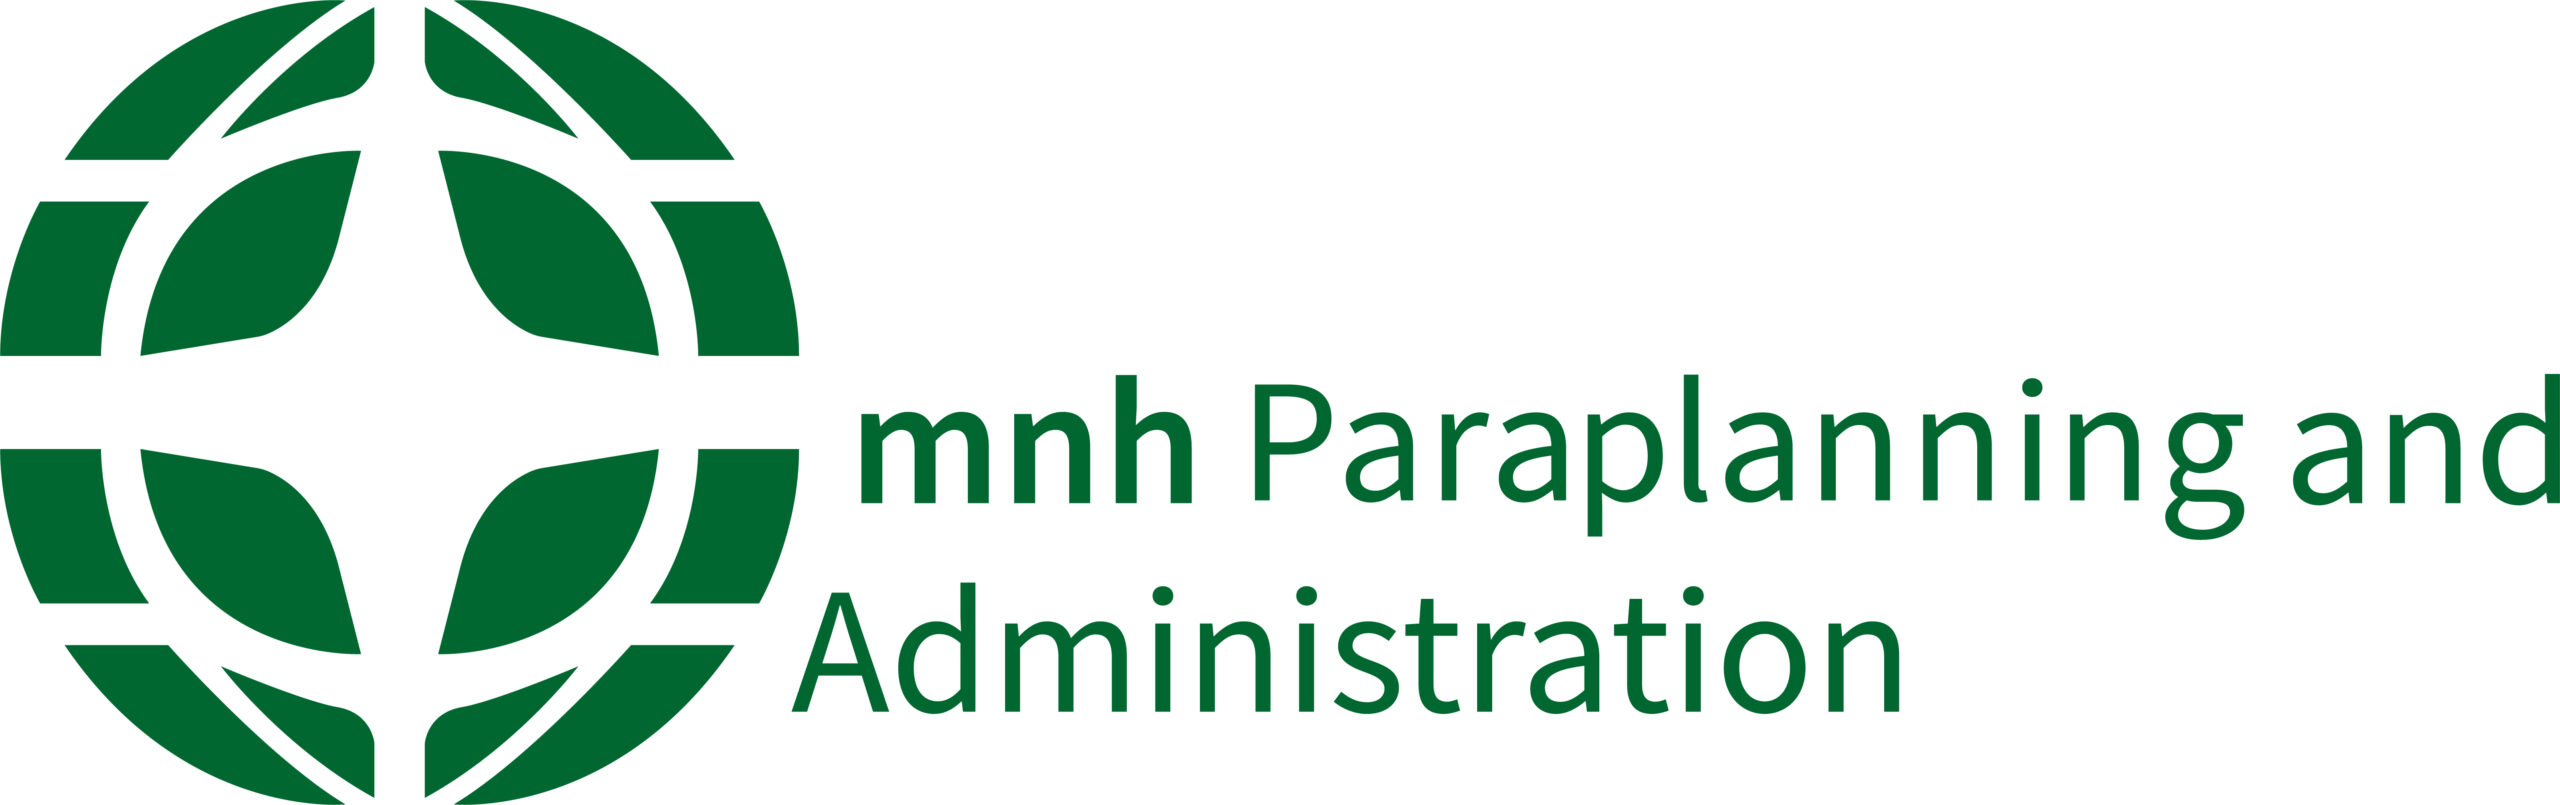 mnh Para Planning and Administration